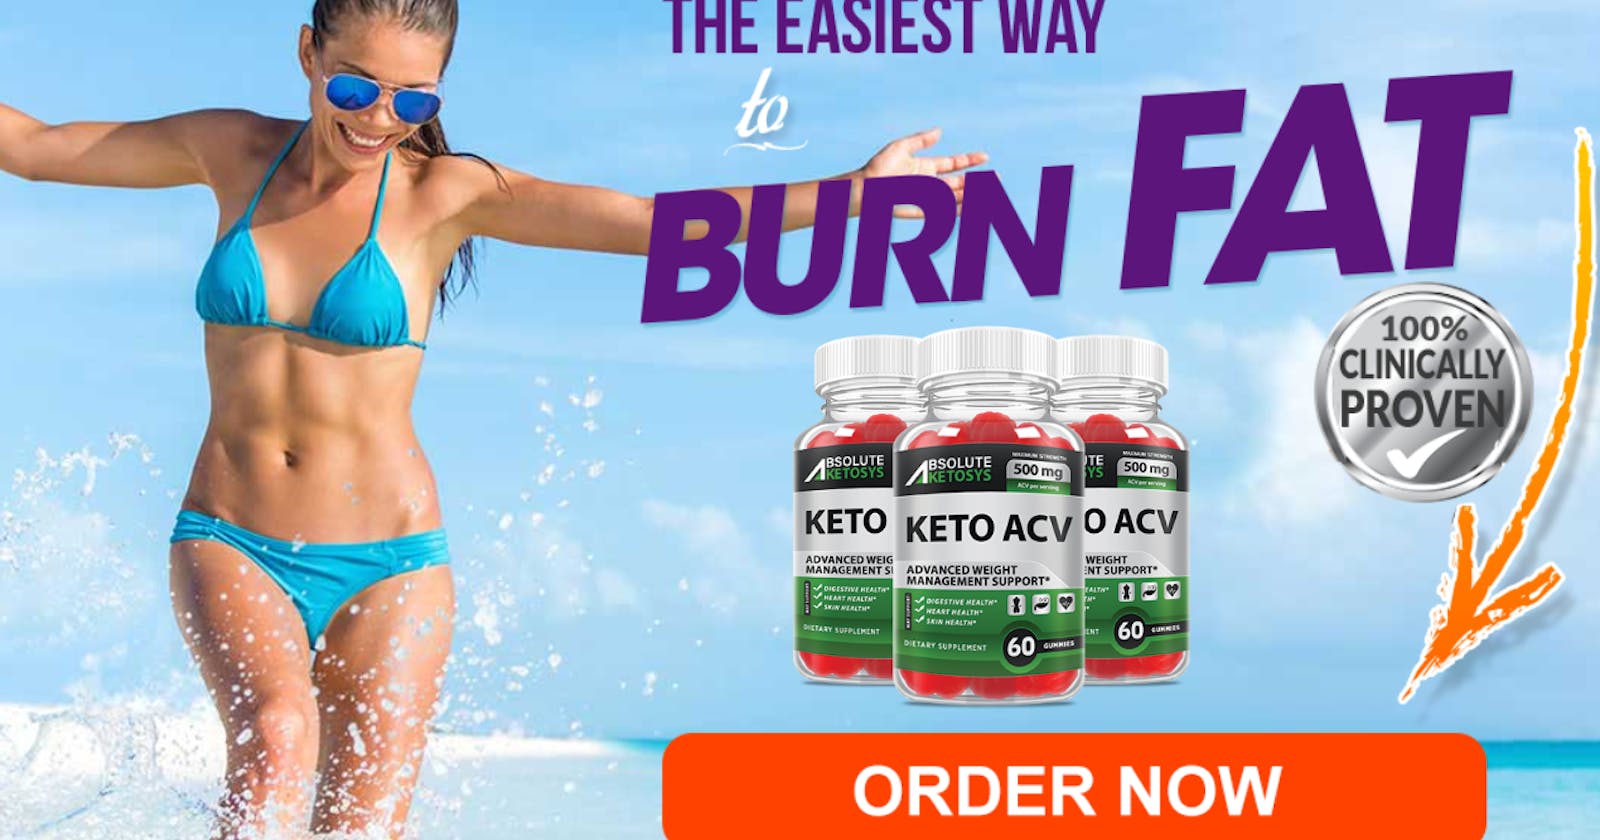 Absolute Ketosys Cleanse Keto ACV: The Powerful Combination for Weight Loss!